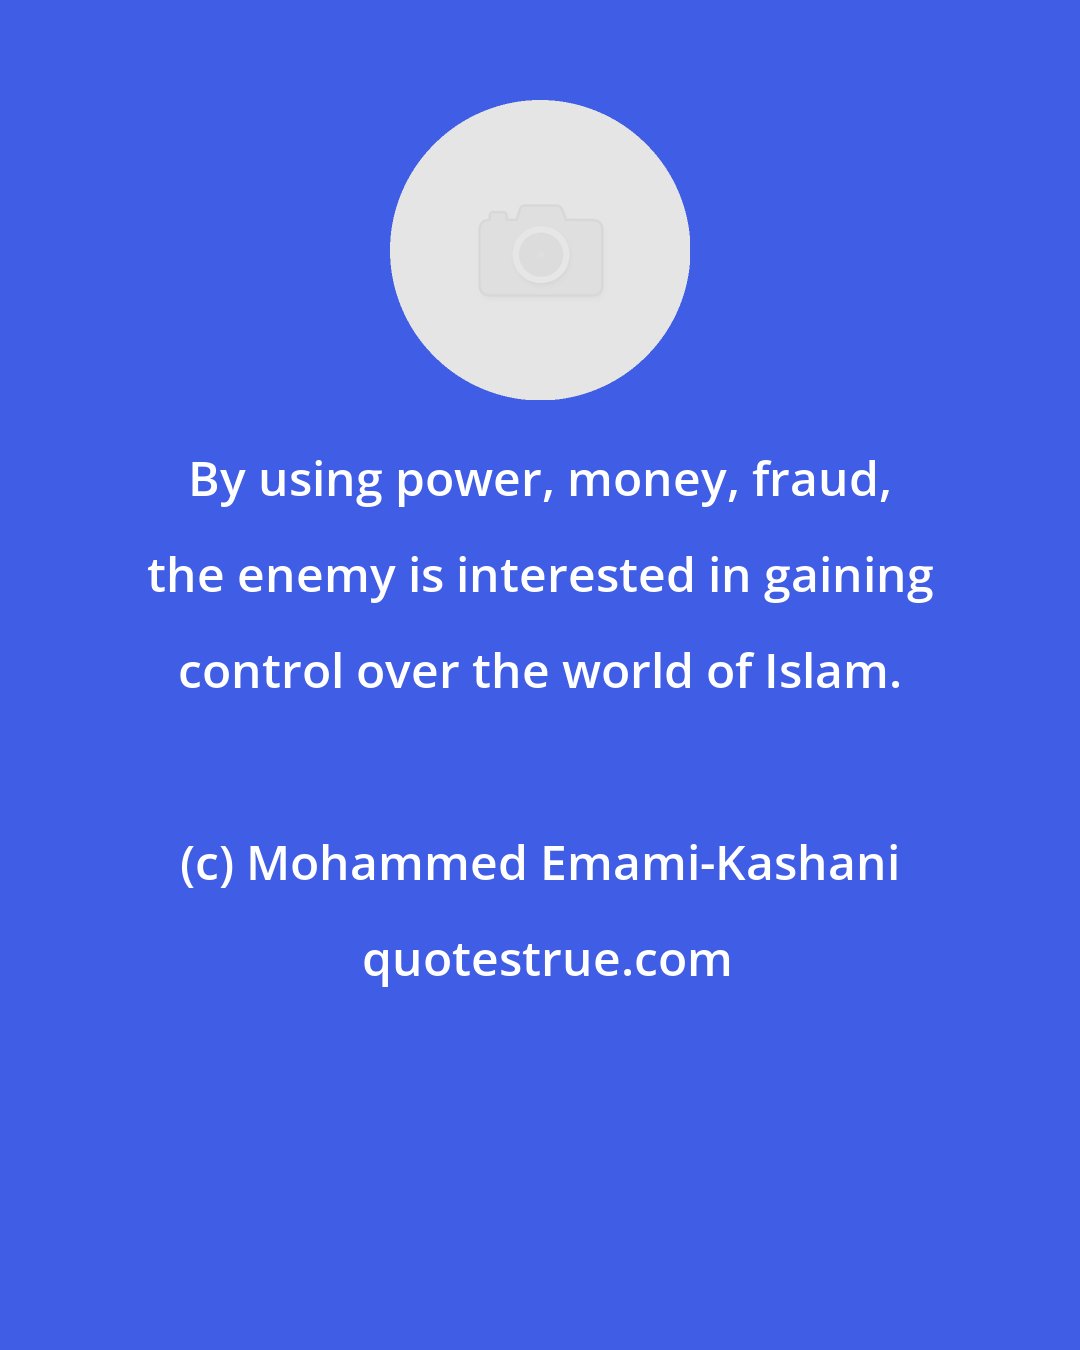 Mohammed Emami-Kashani: By using power, money, fraud, the enemy is interested in gaining control over the world of Islam.